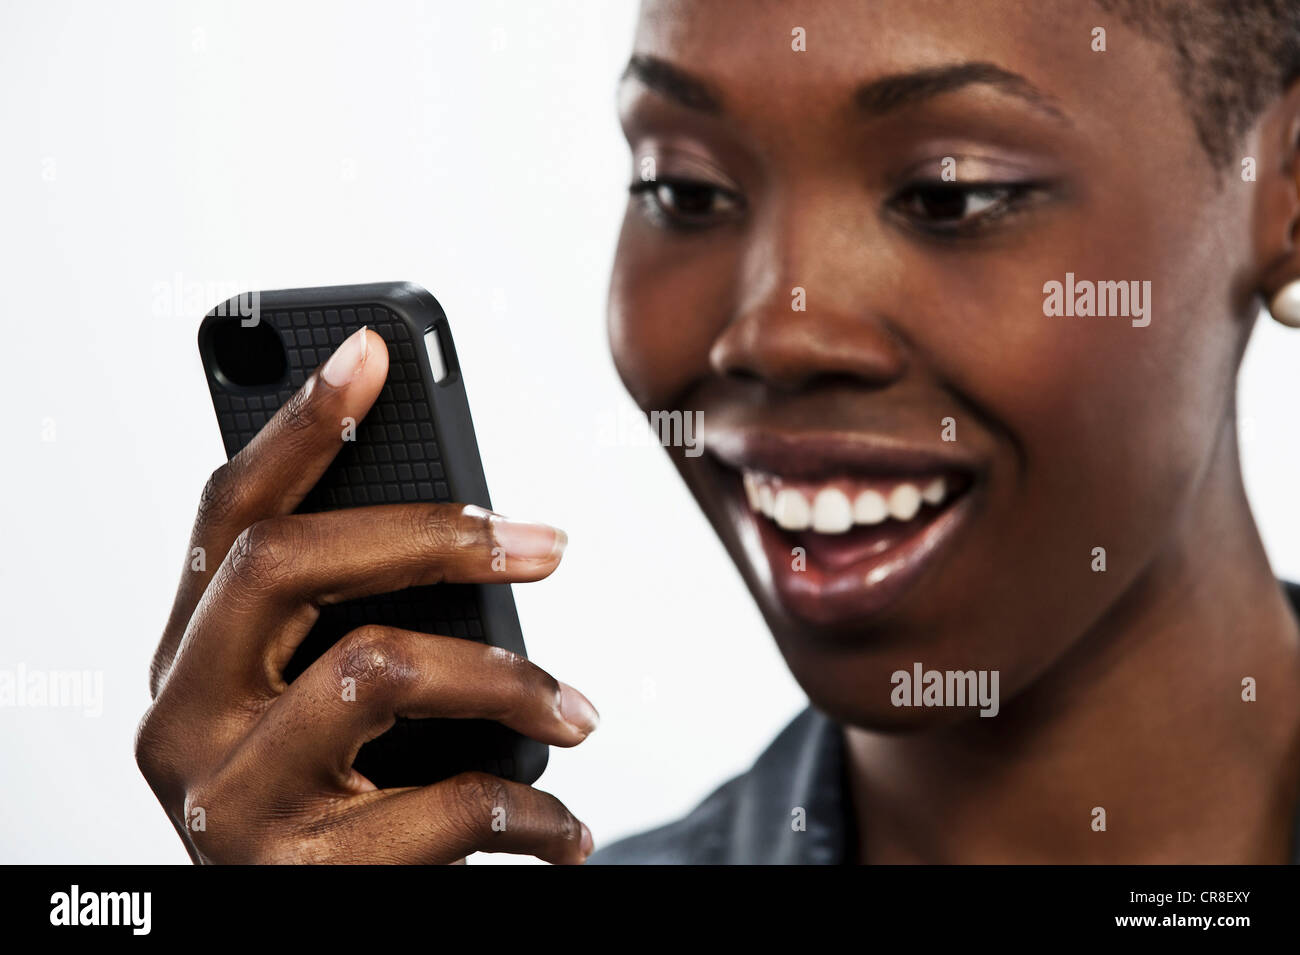 Young woman holding cellphone against white background Stock Photo